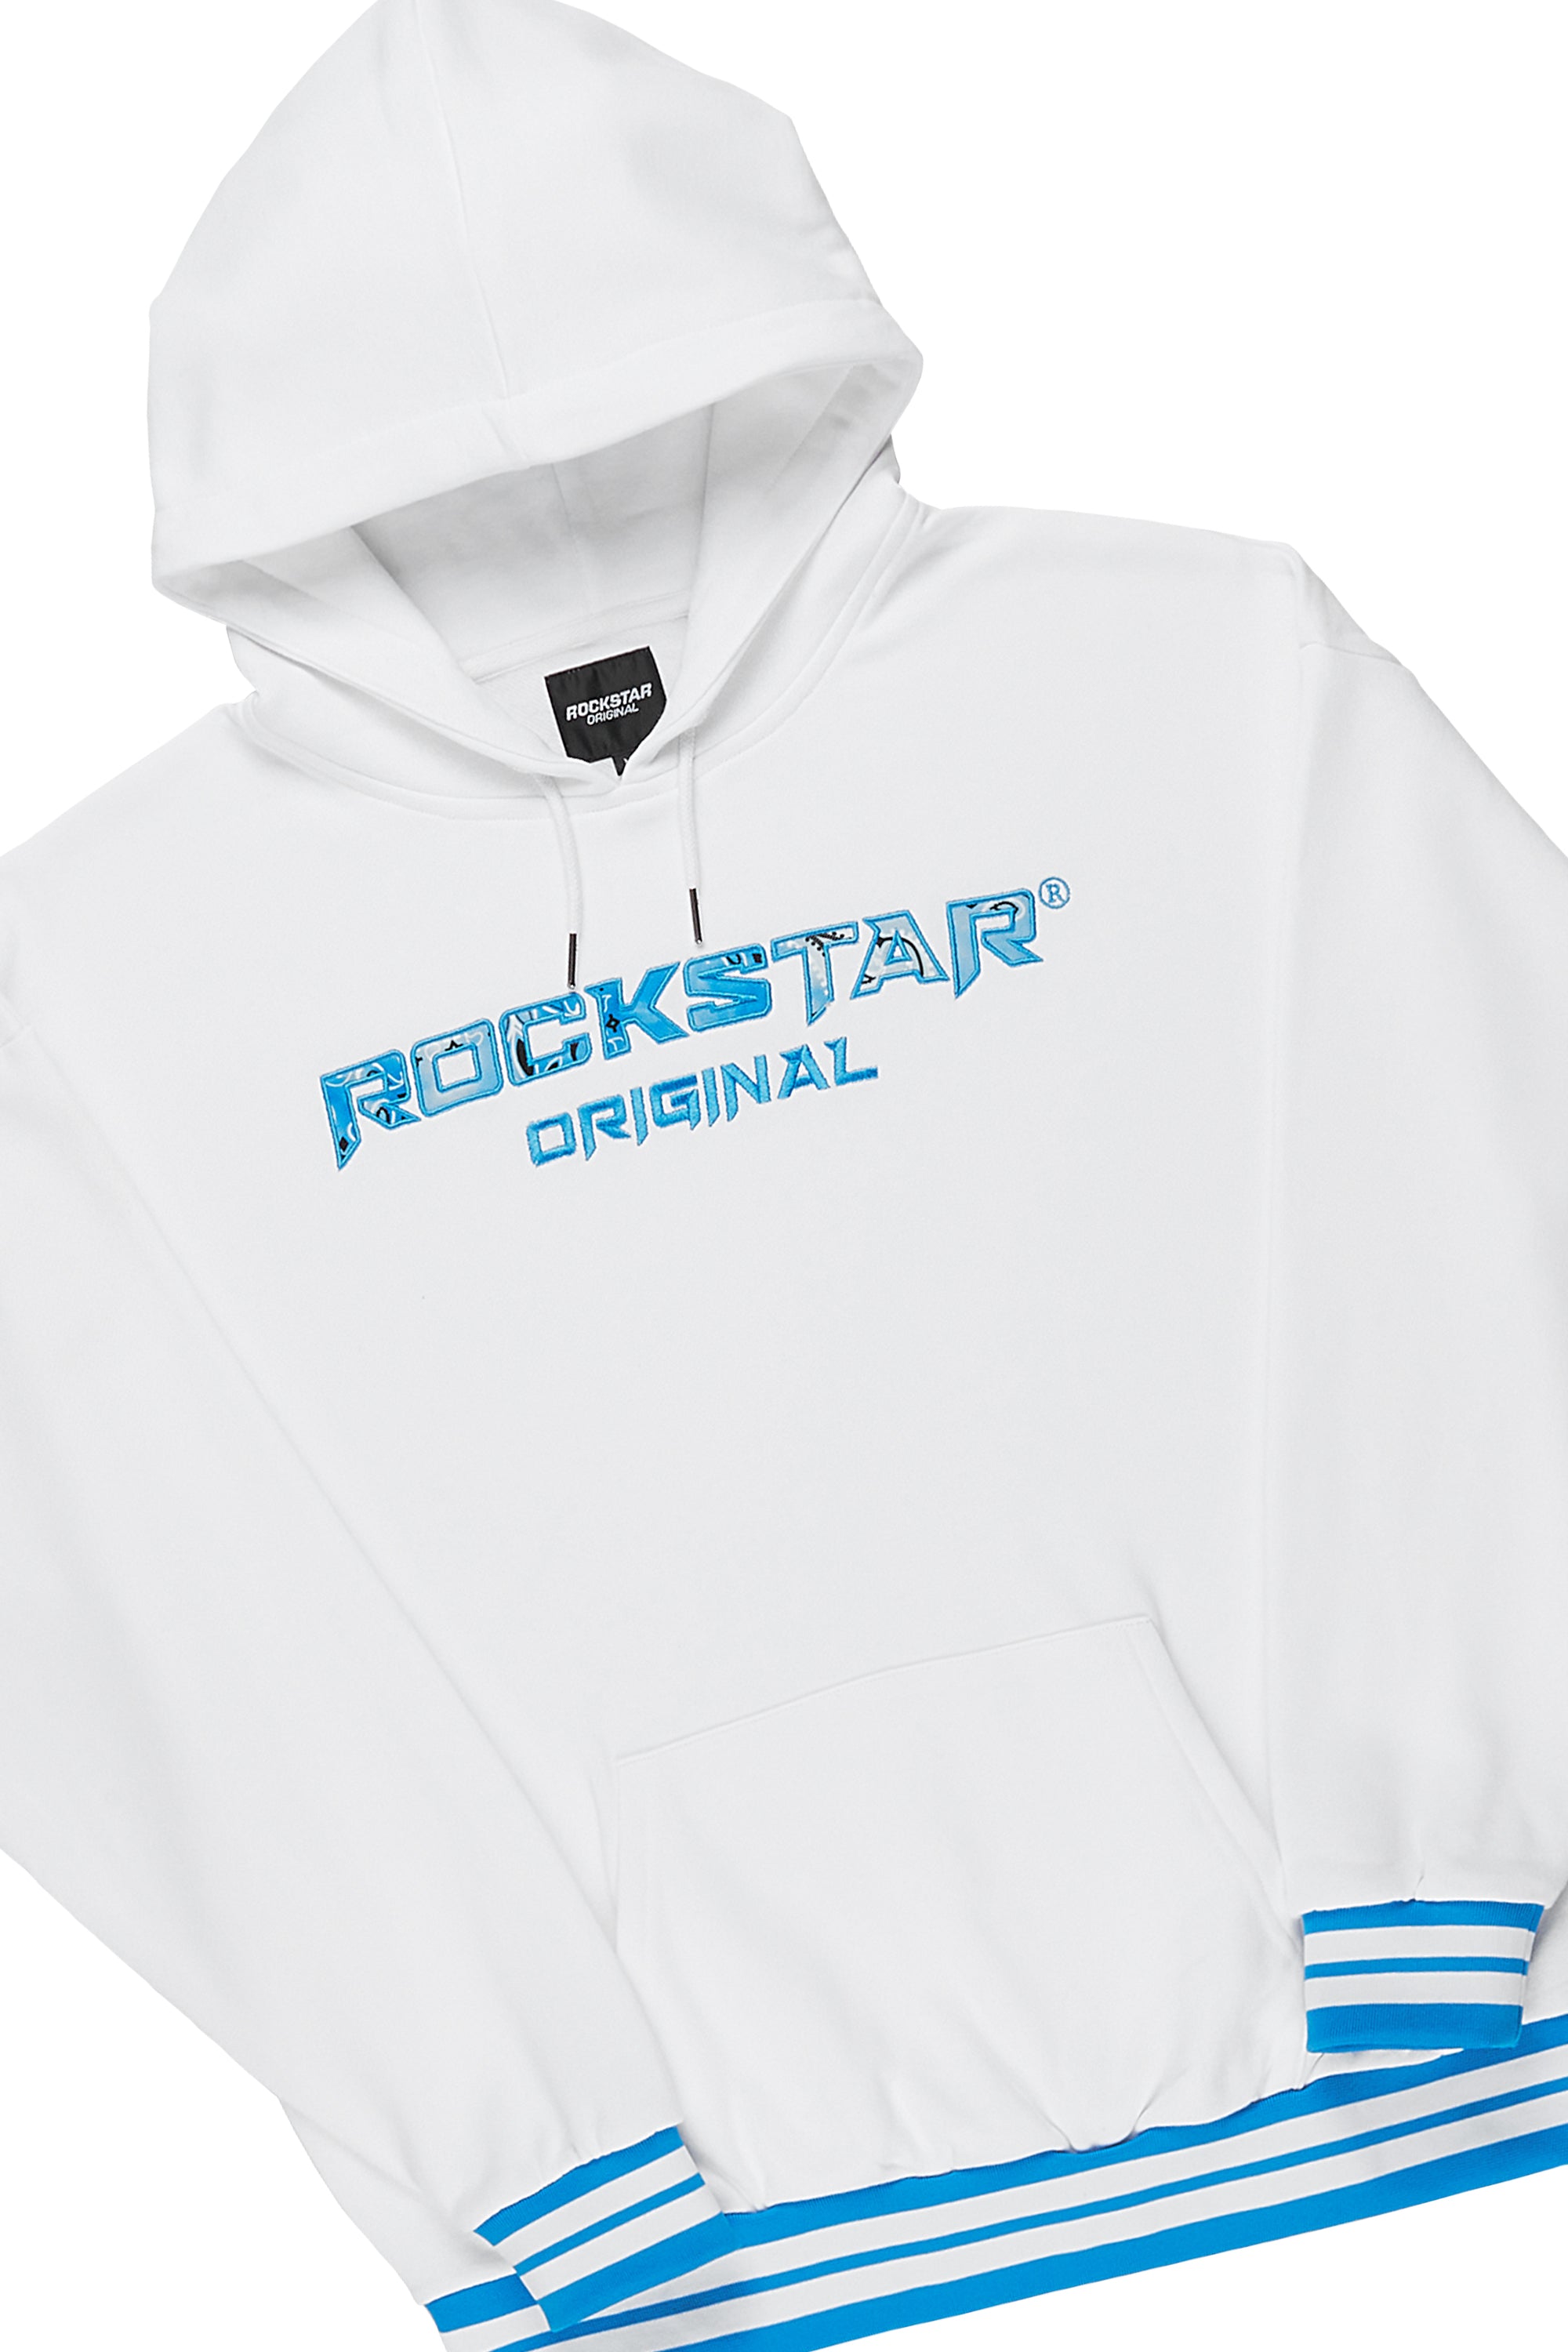 Booker Blue Graphic Hoodie Track Set